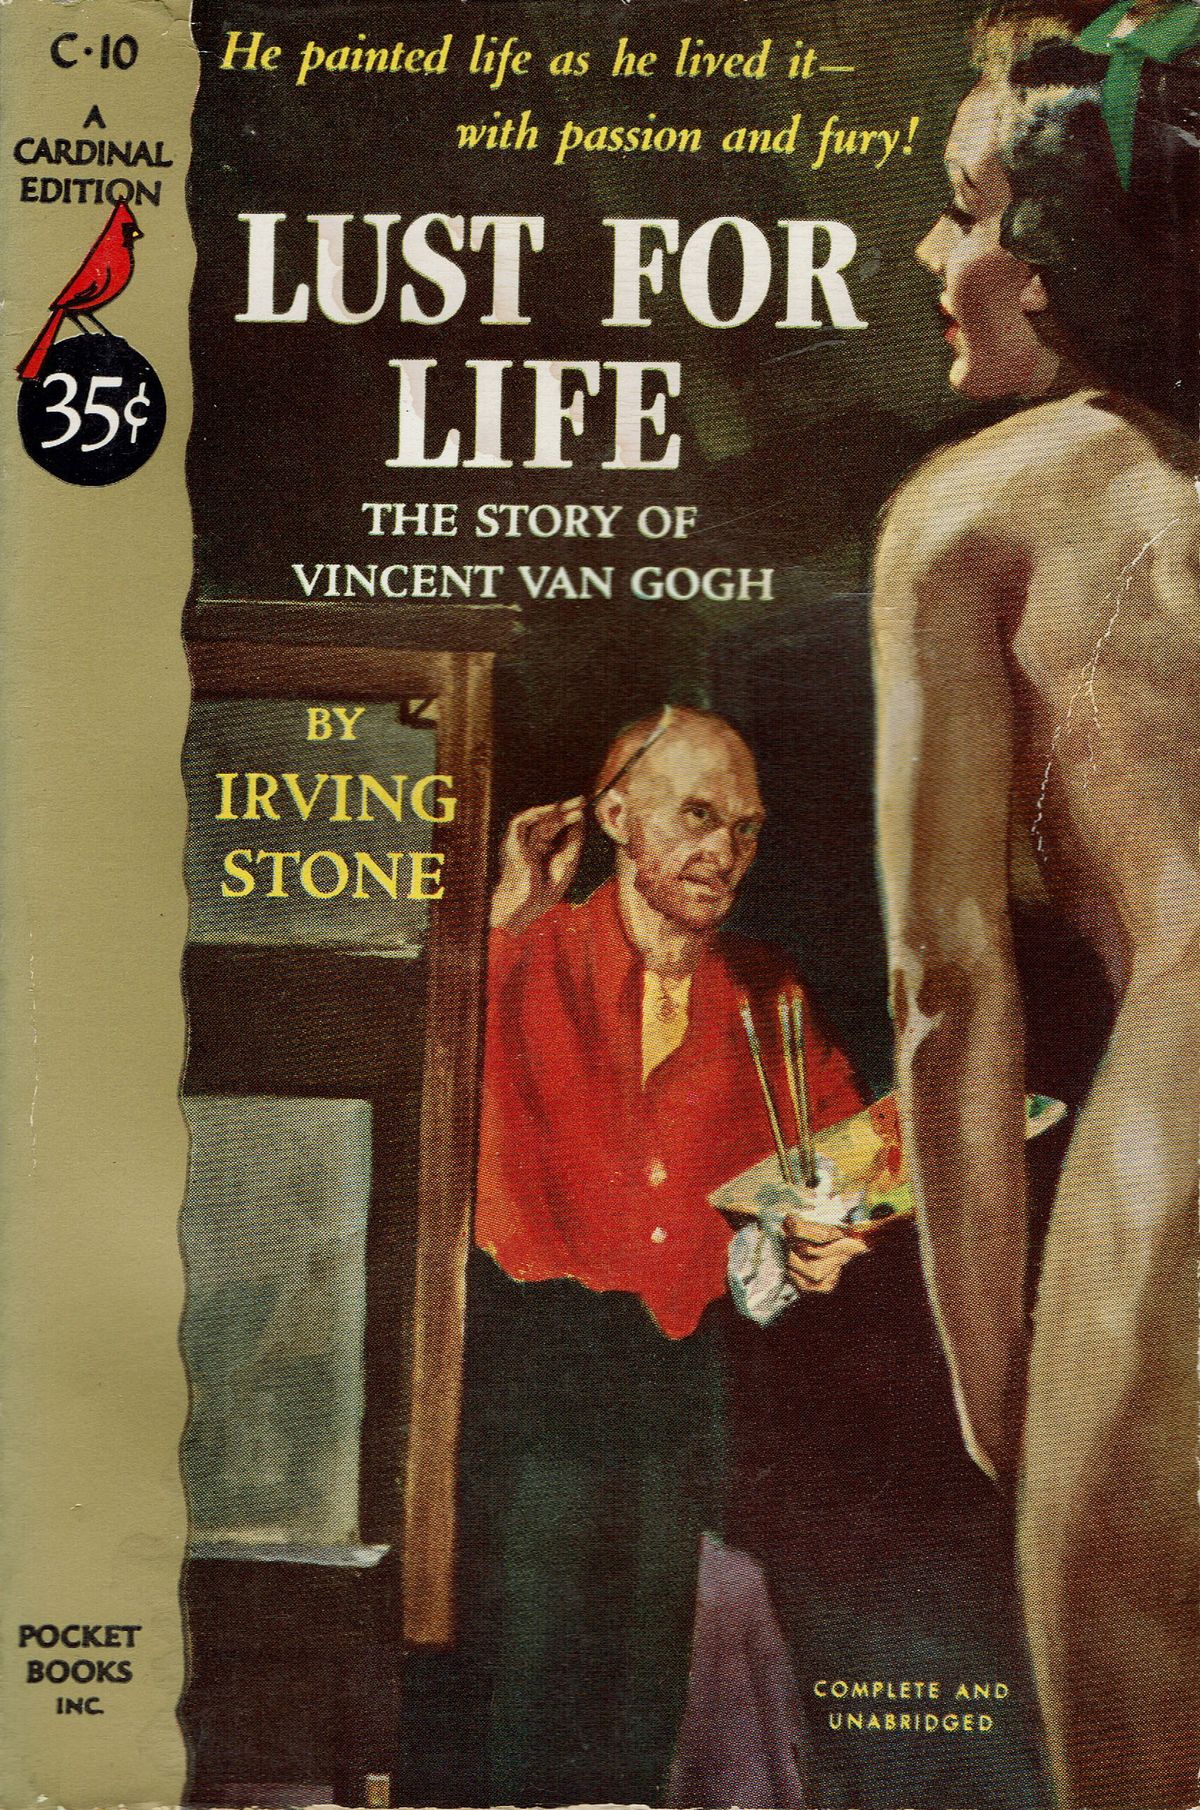 Cover of Irving Stone’s novel Lust for Life: The Story of Vincent van Gogh, Pocket Books/Cardinal edition, 1951 